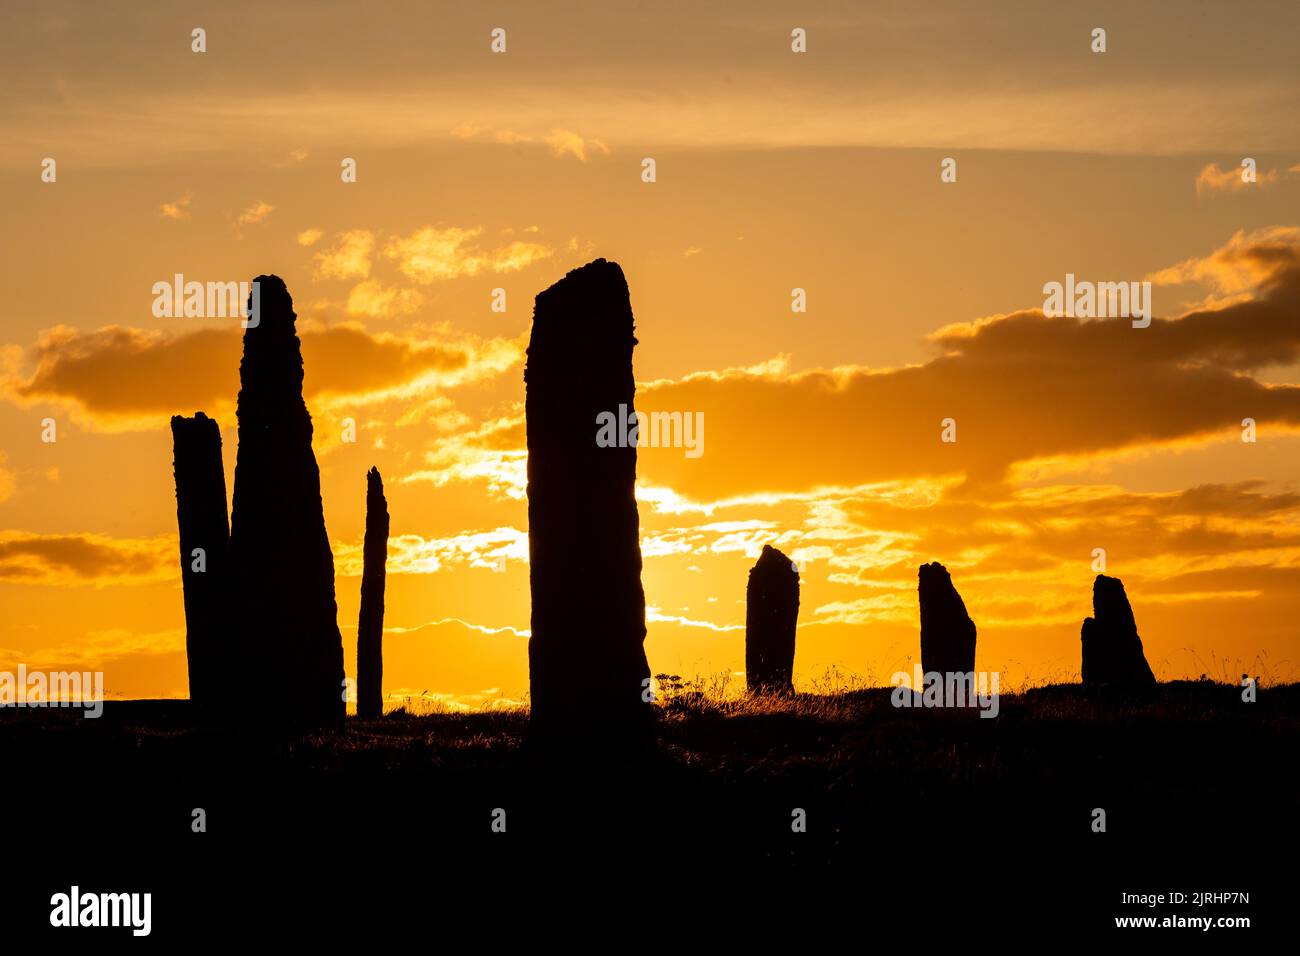 Orkney, UK. 24th Aug, 2022. The Ring of Brodgar, Orkney, looks dramatic as the sun sets. The 4,500 year old neolithic stone circle is part of the Heart of Neolithic Orkney World Heritage Site, and of the 60 original stones just 36 survive. Credit: Peter Lopeman/Alamy Live News Stock Photo